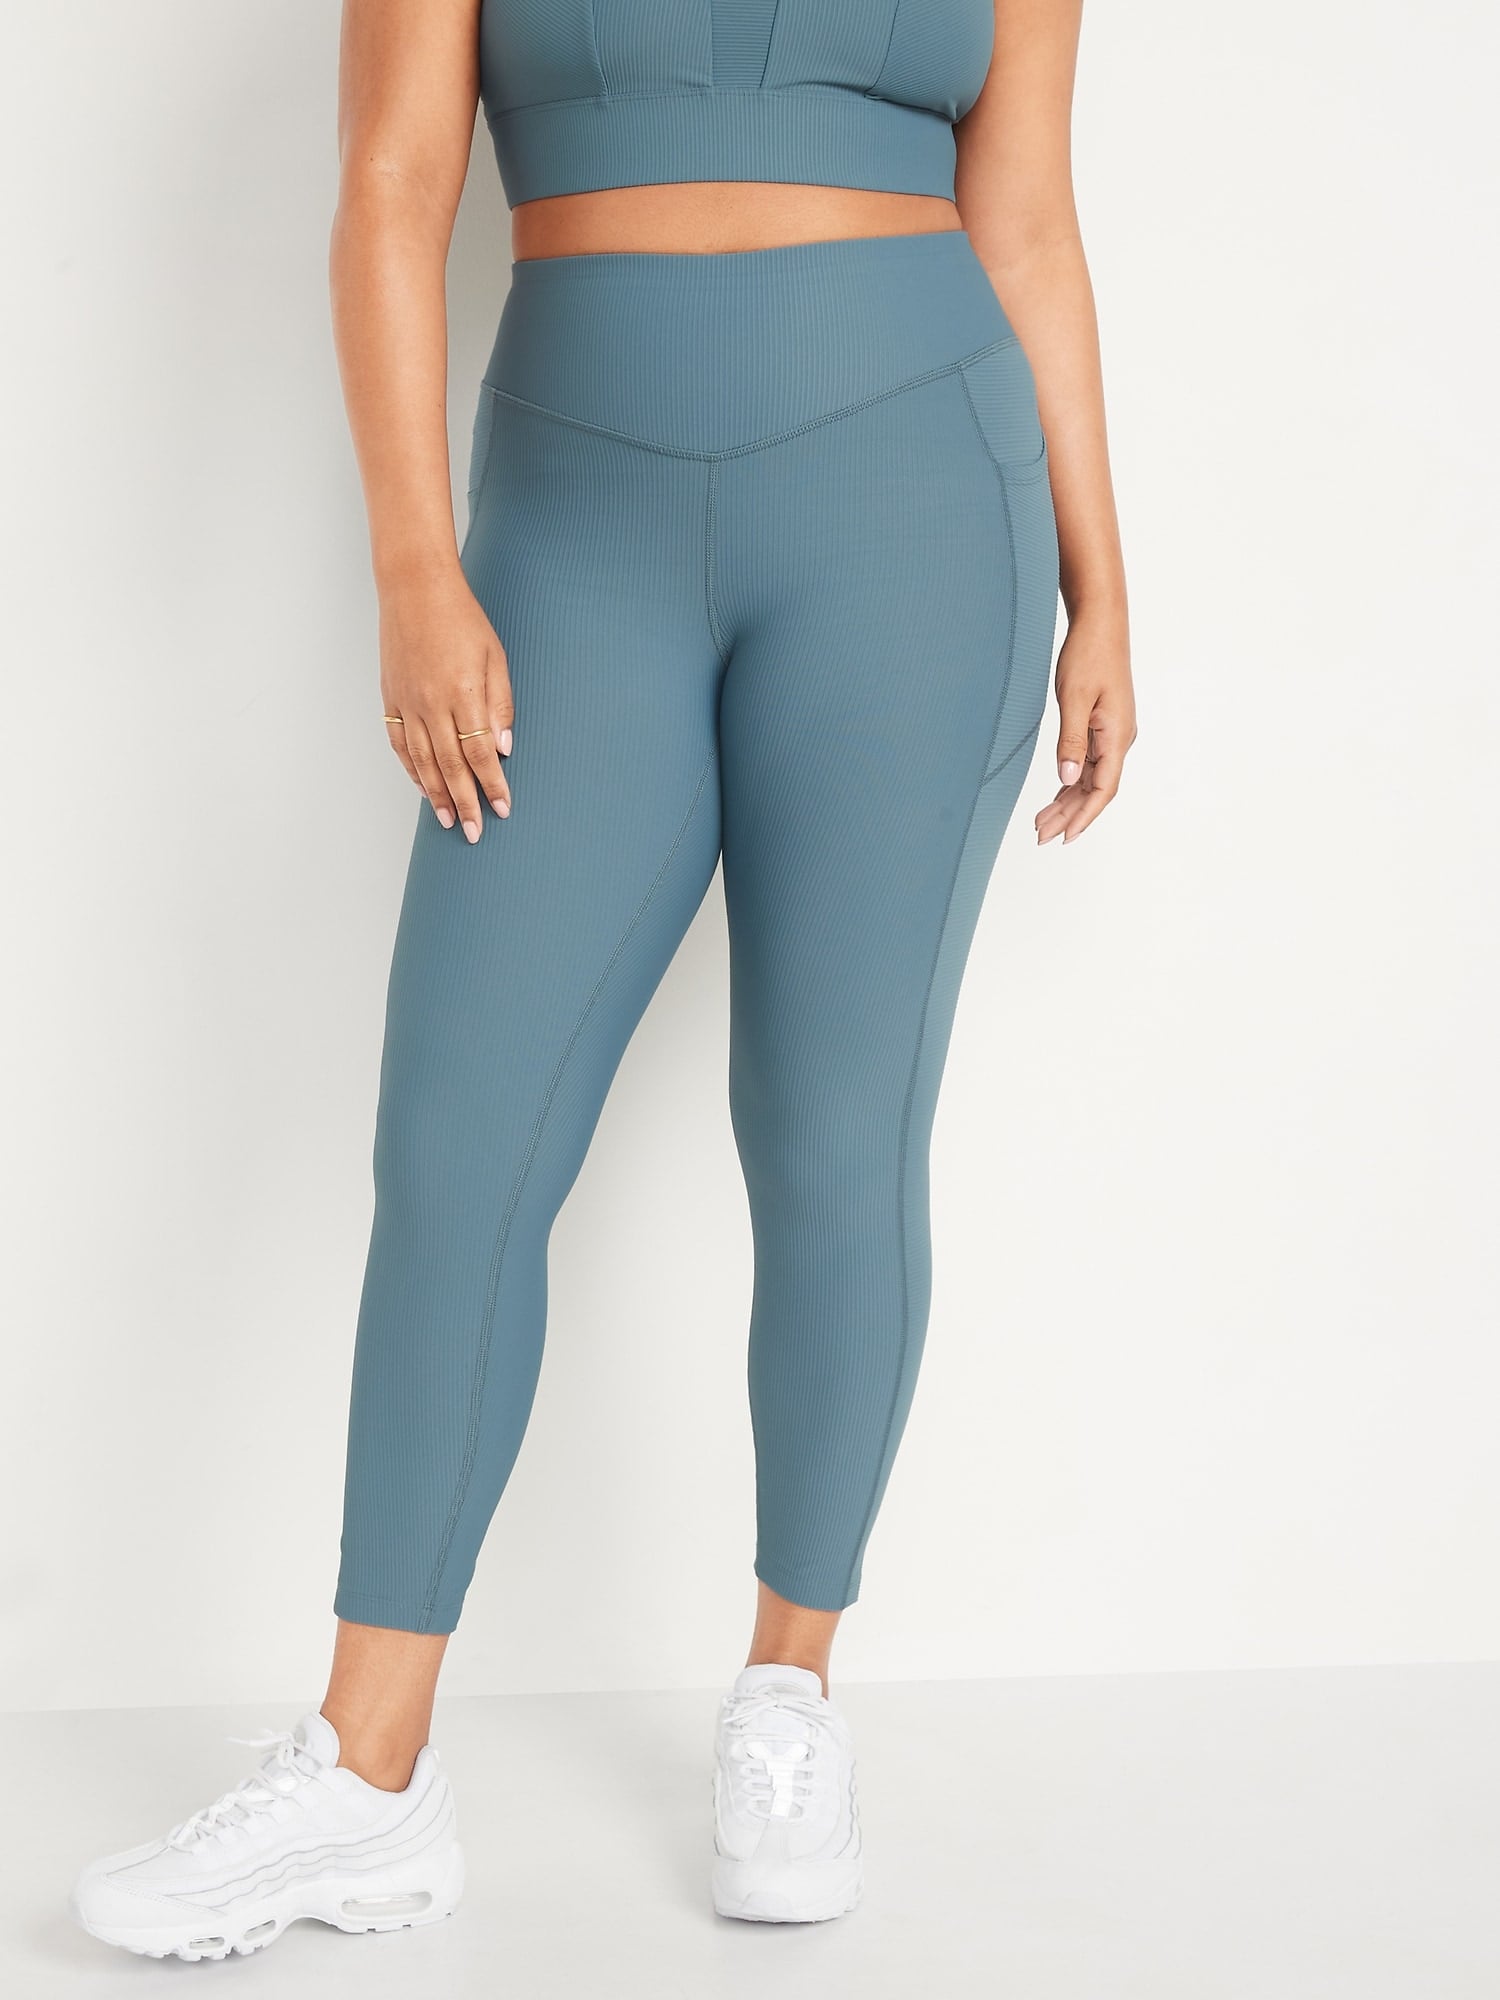 2023 High Waisted Yoga Leggings With Side Pockets For Women Quick